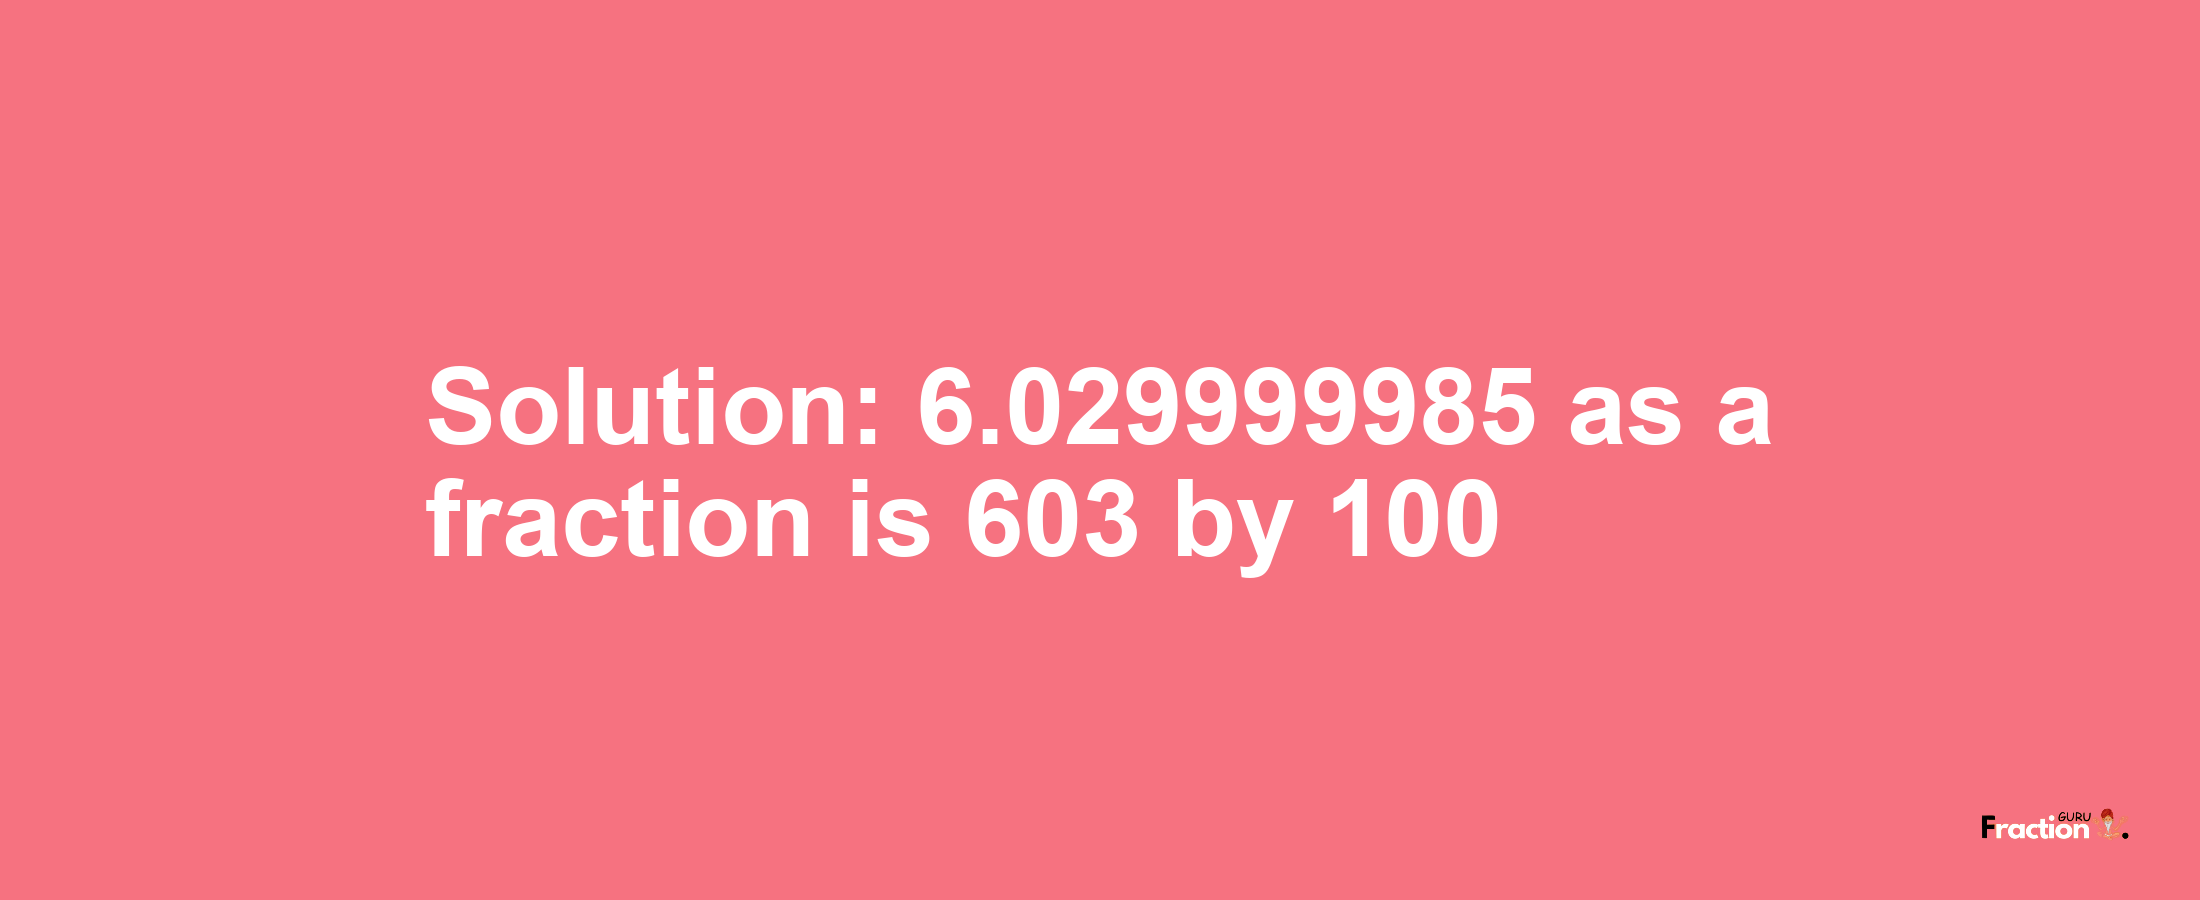 Solution:6.029999985 as a fraction is 603/100